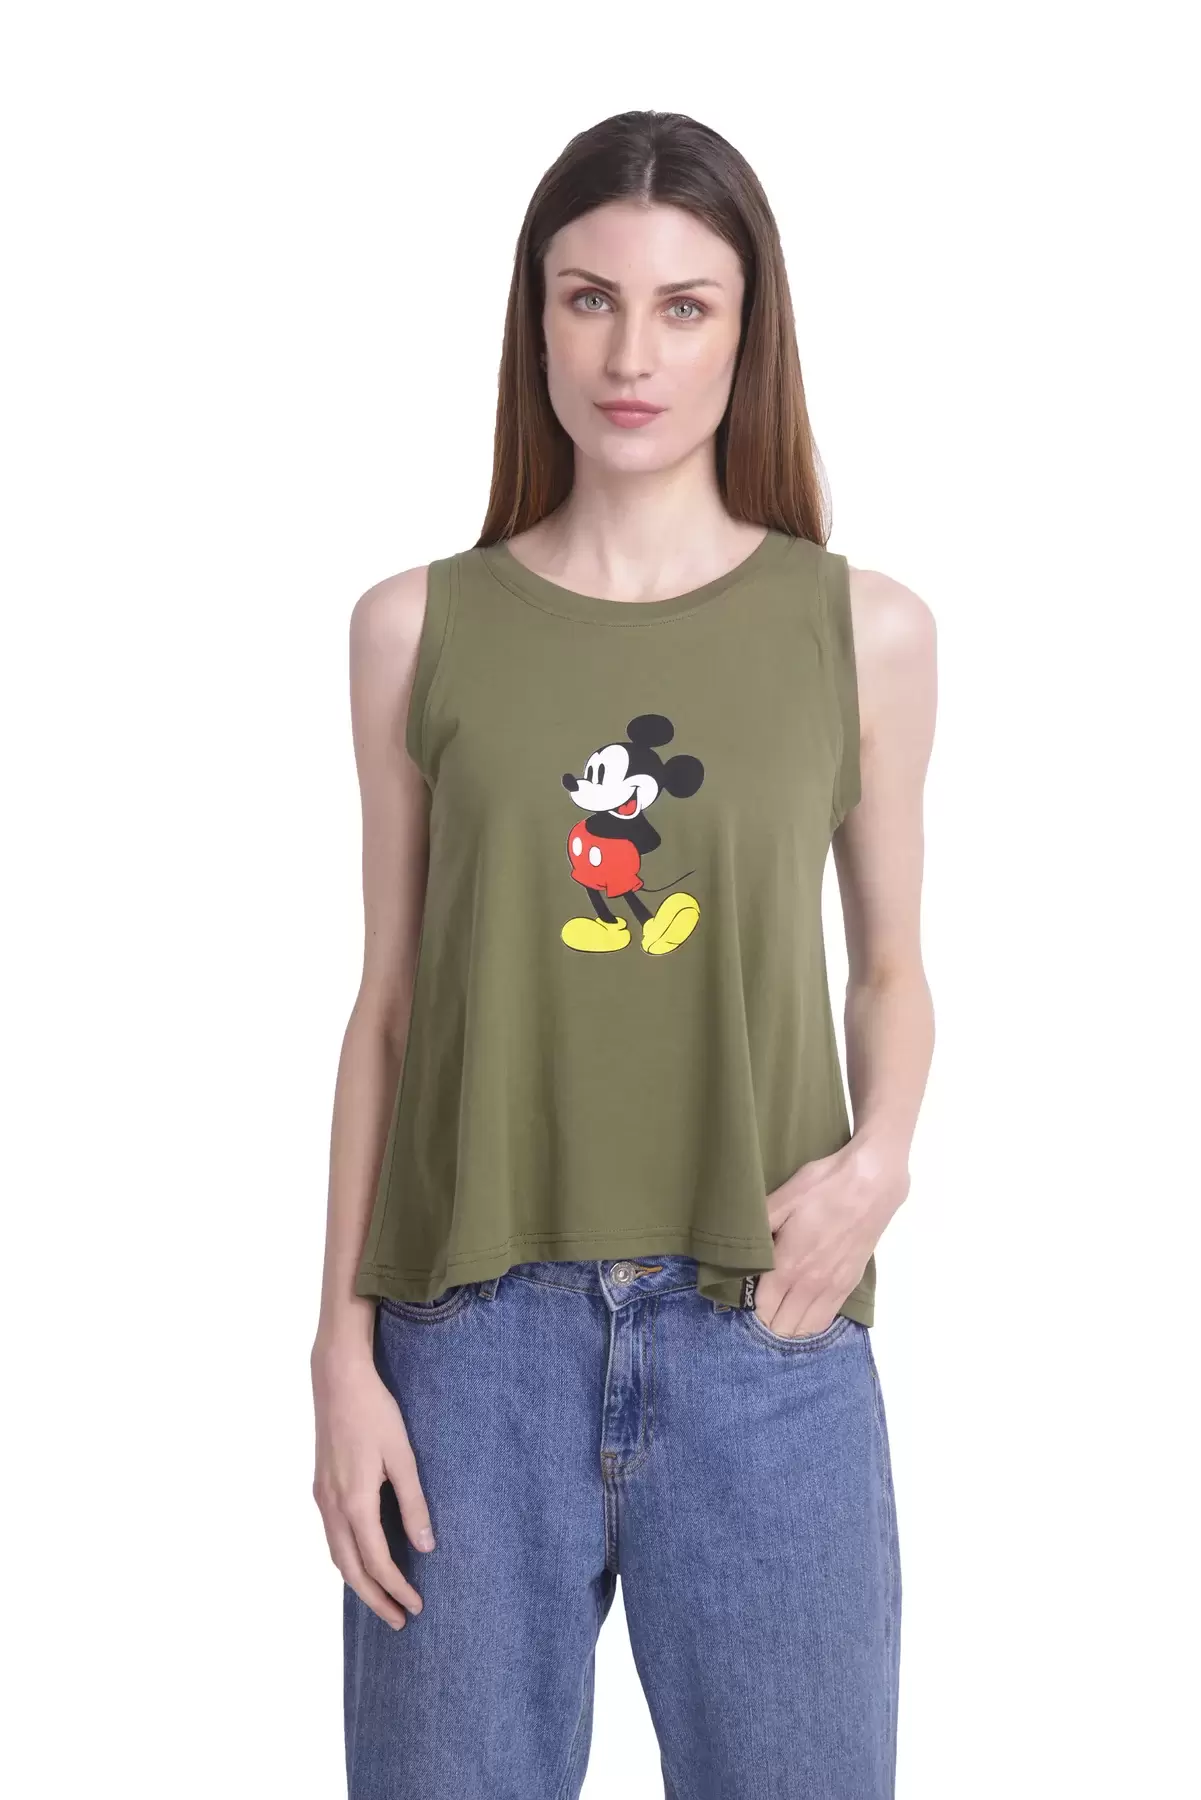 OLIVE GREEN A SHAPED MICKEY PRINT TANK TOP